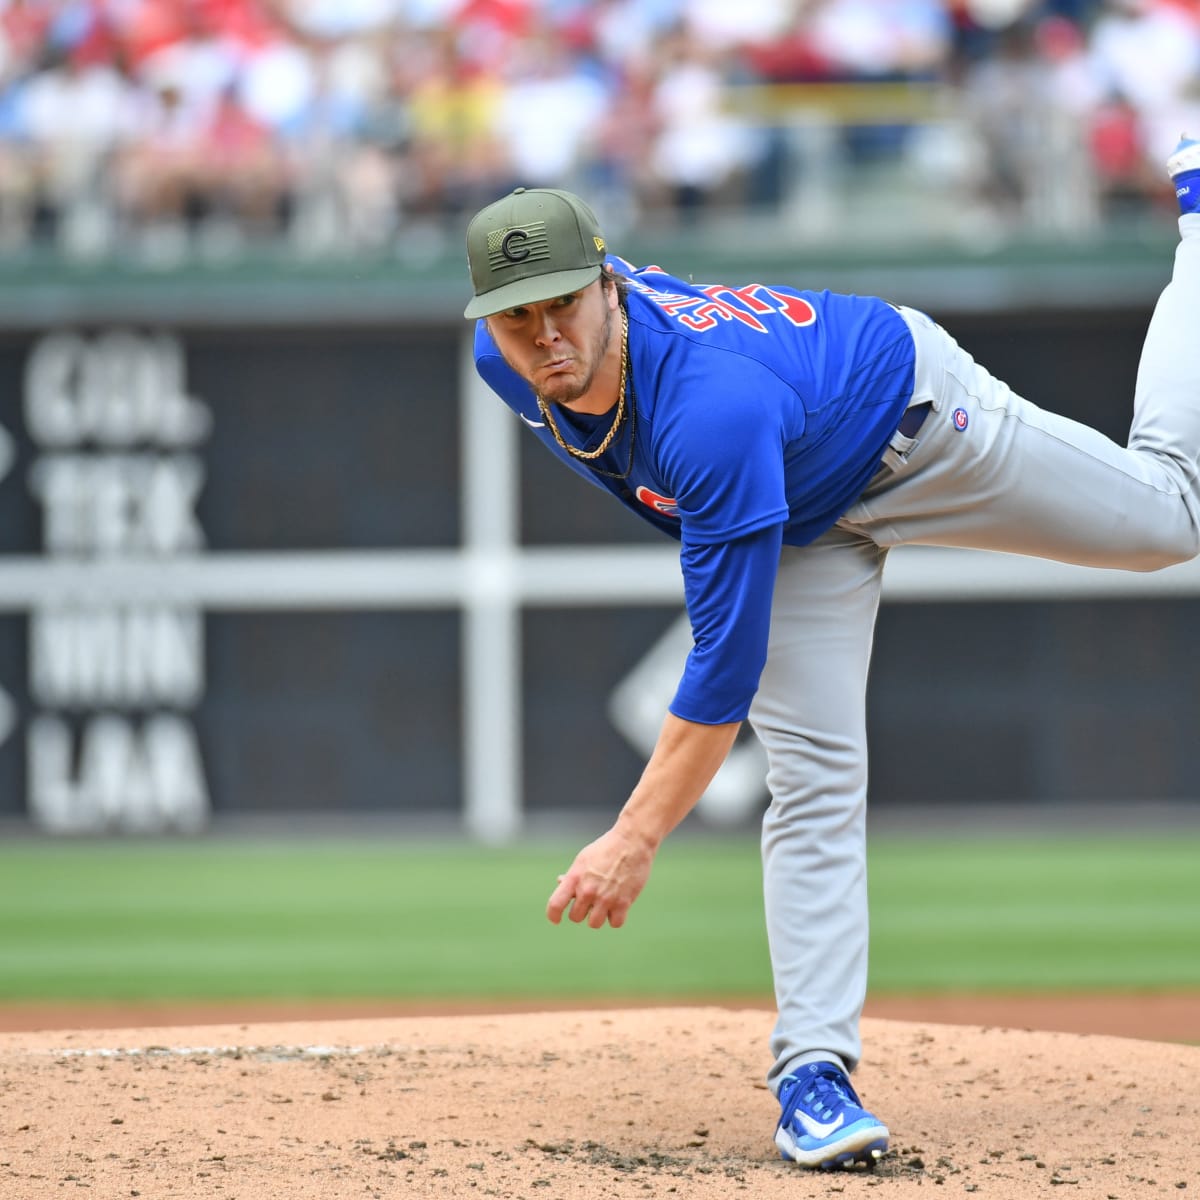 Cubs ace pitcher Justin Steele joins race for Cy Young Award